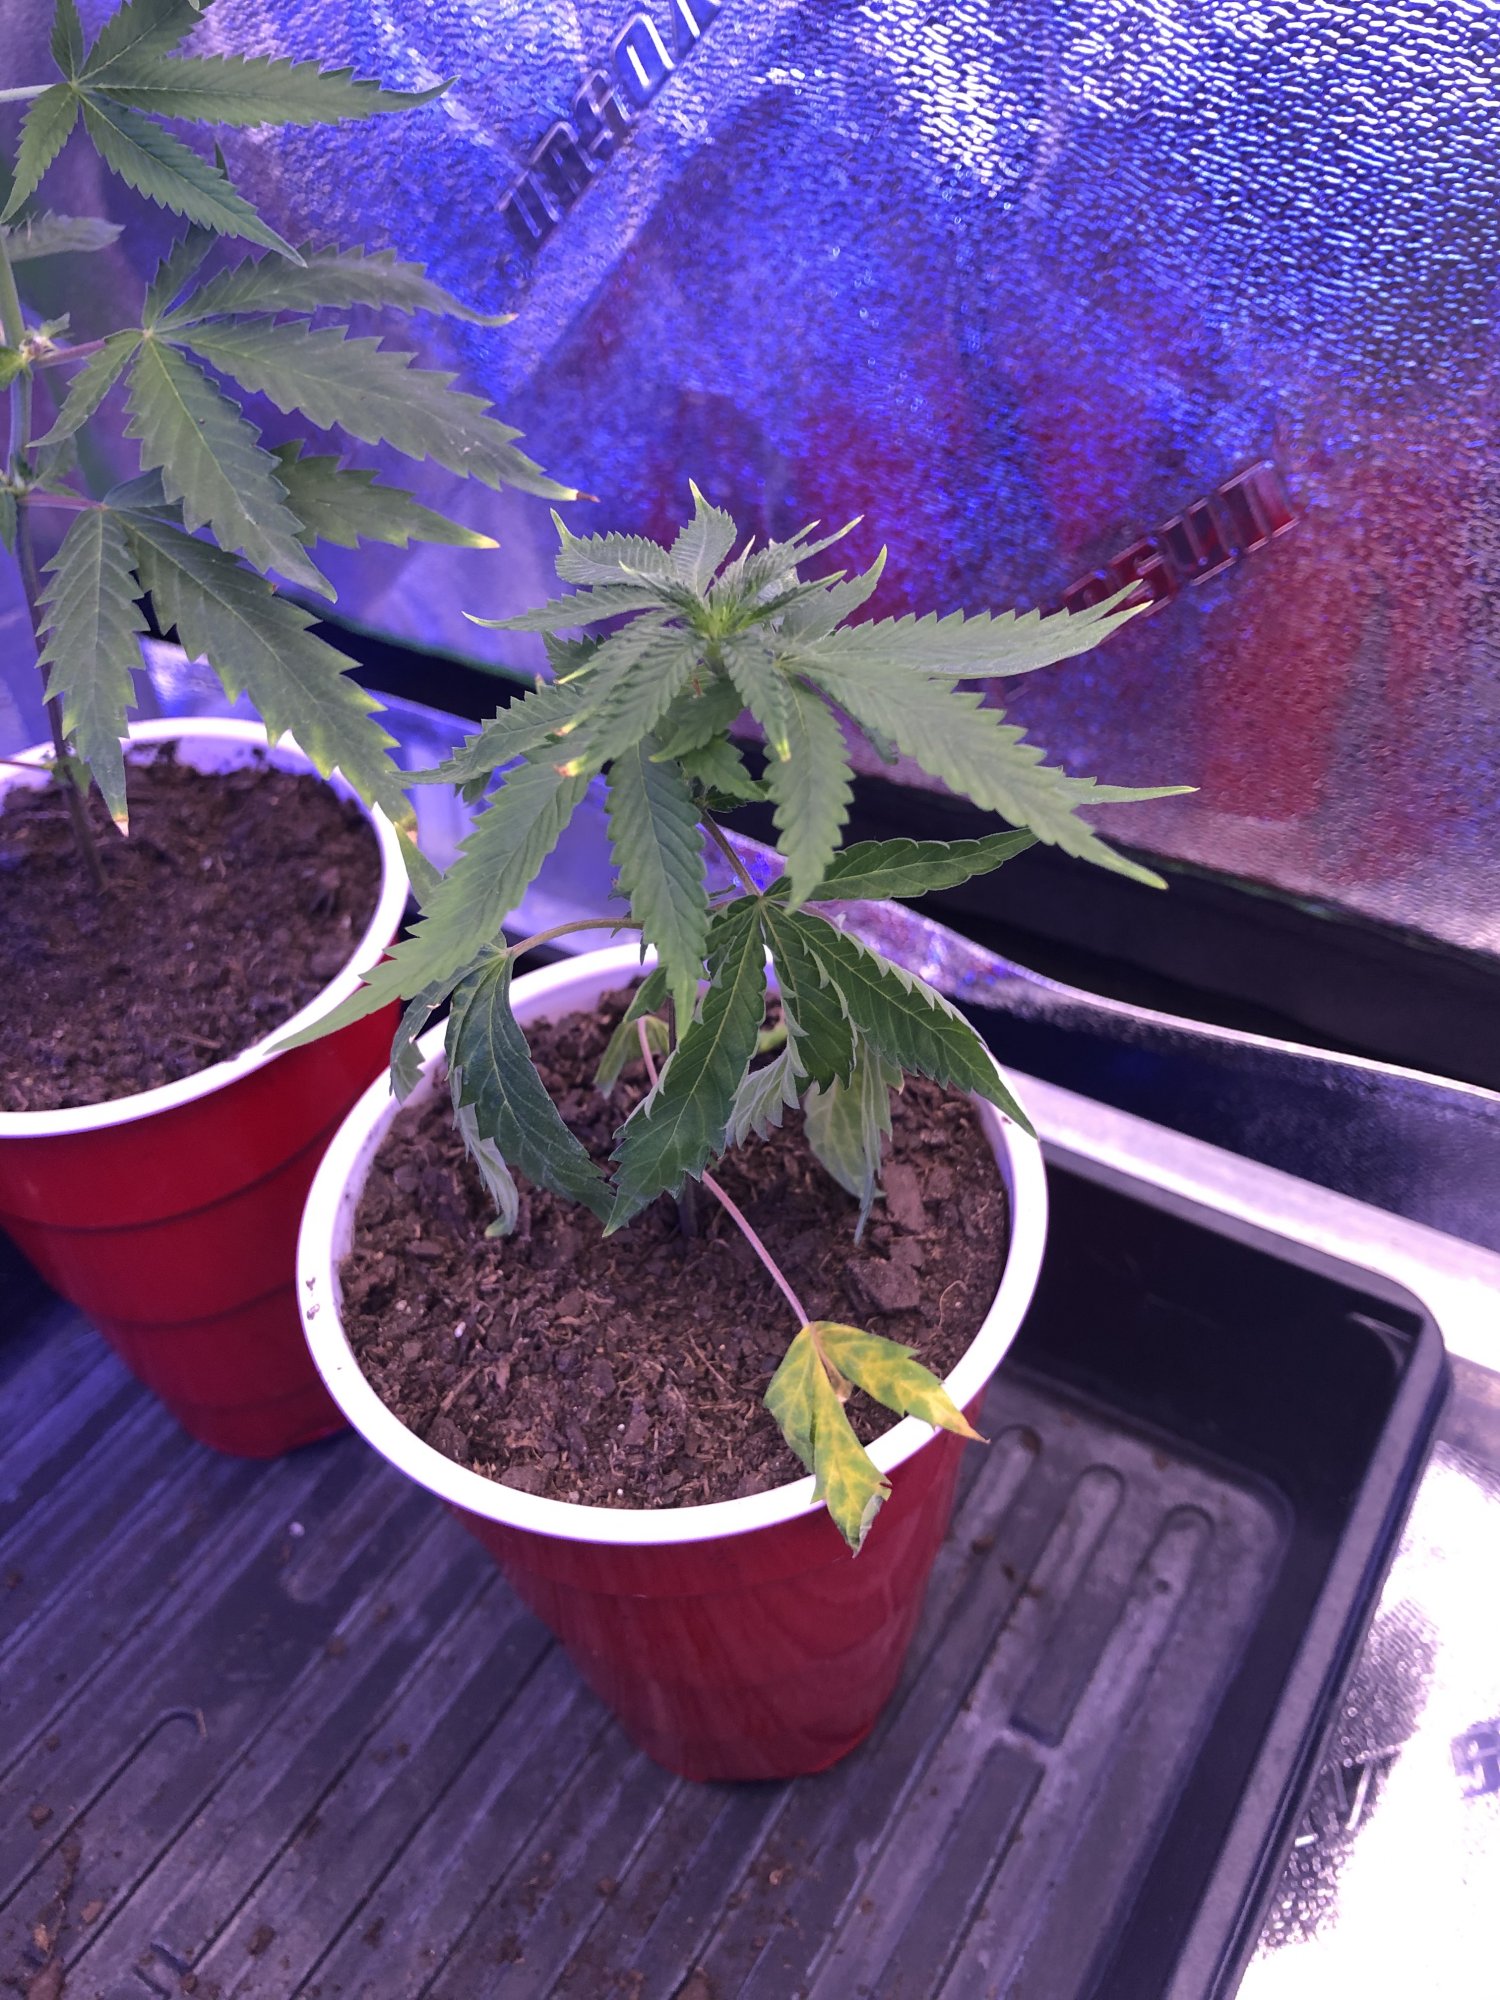 Cloning and nute burn 9